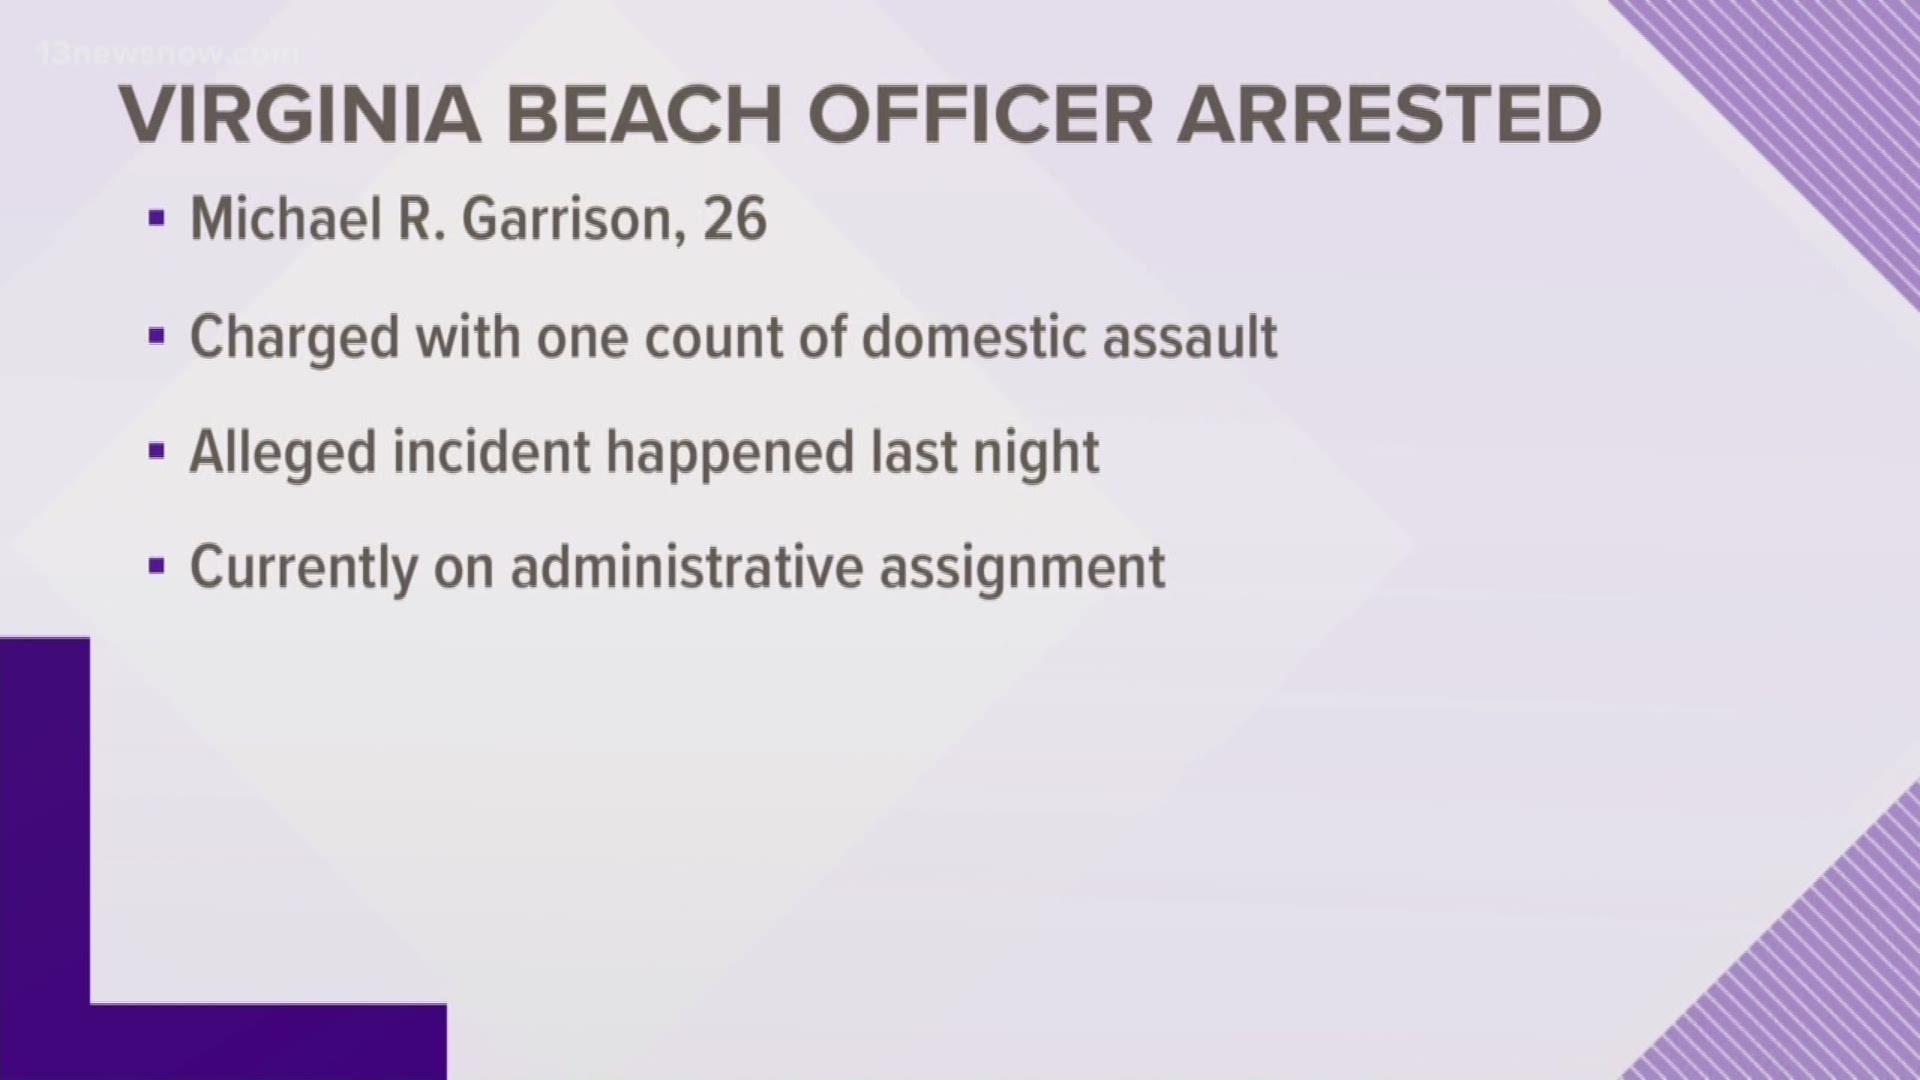 Michael R. Garrison, 26, was arrested following the alleged incident, which happened on December 31. He is on administrative leave while police investigate.